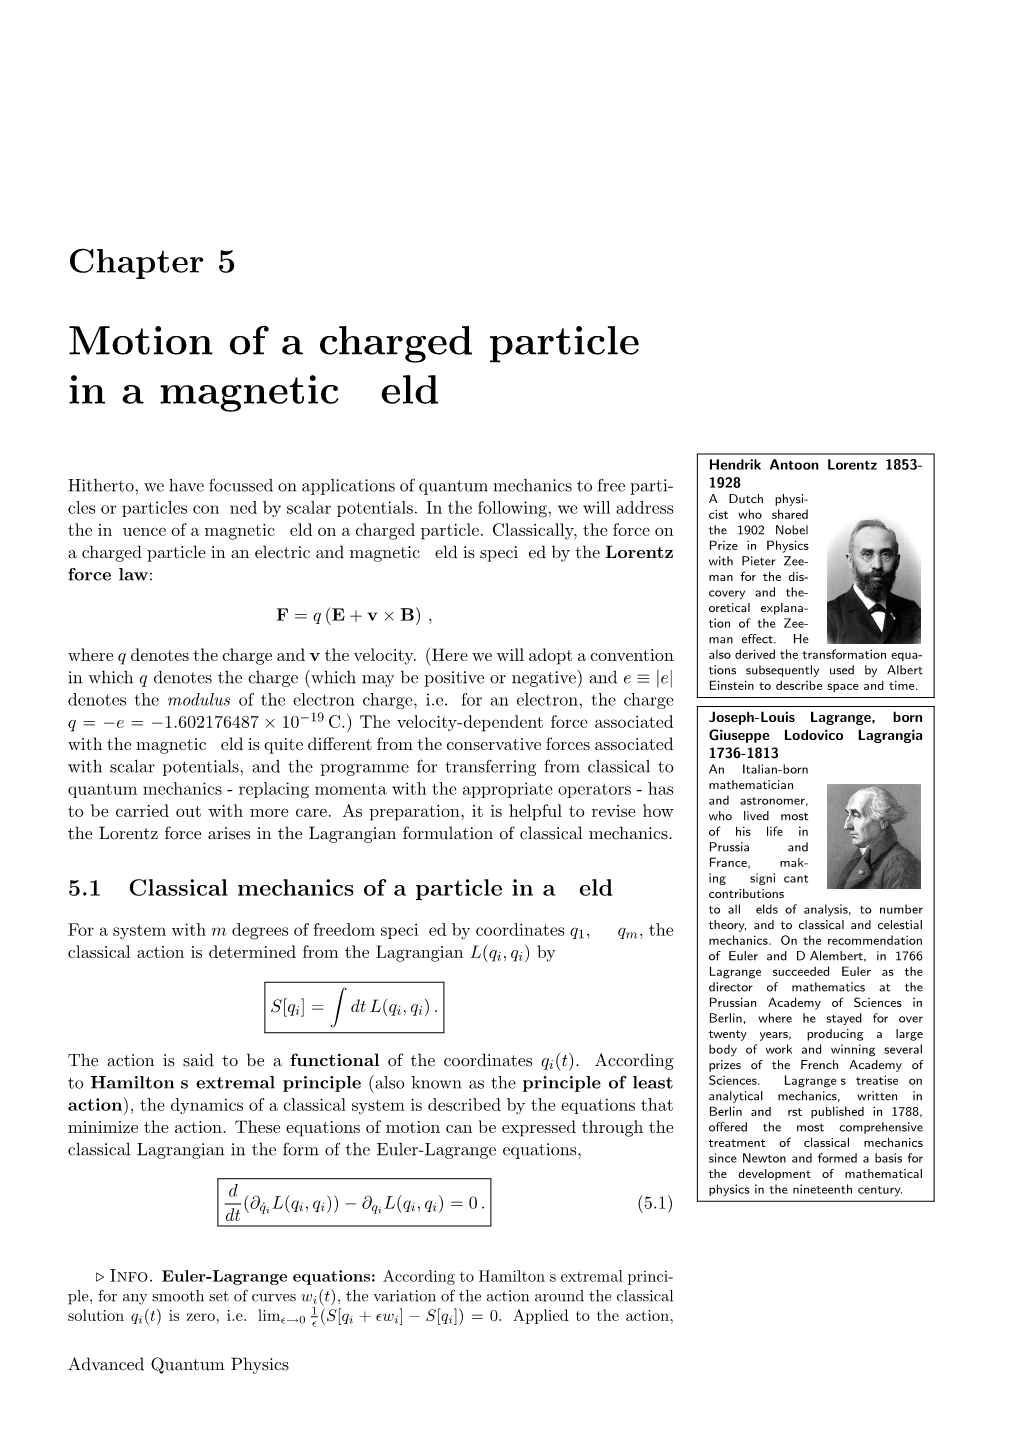 Motion of a Charged Particle in a Magnetic Field